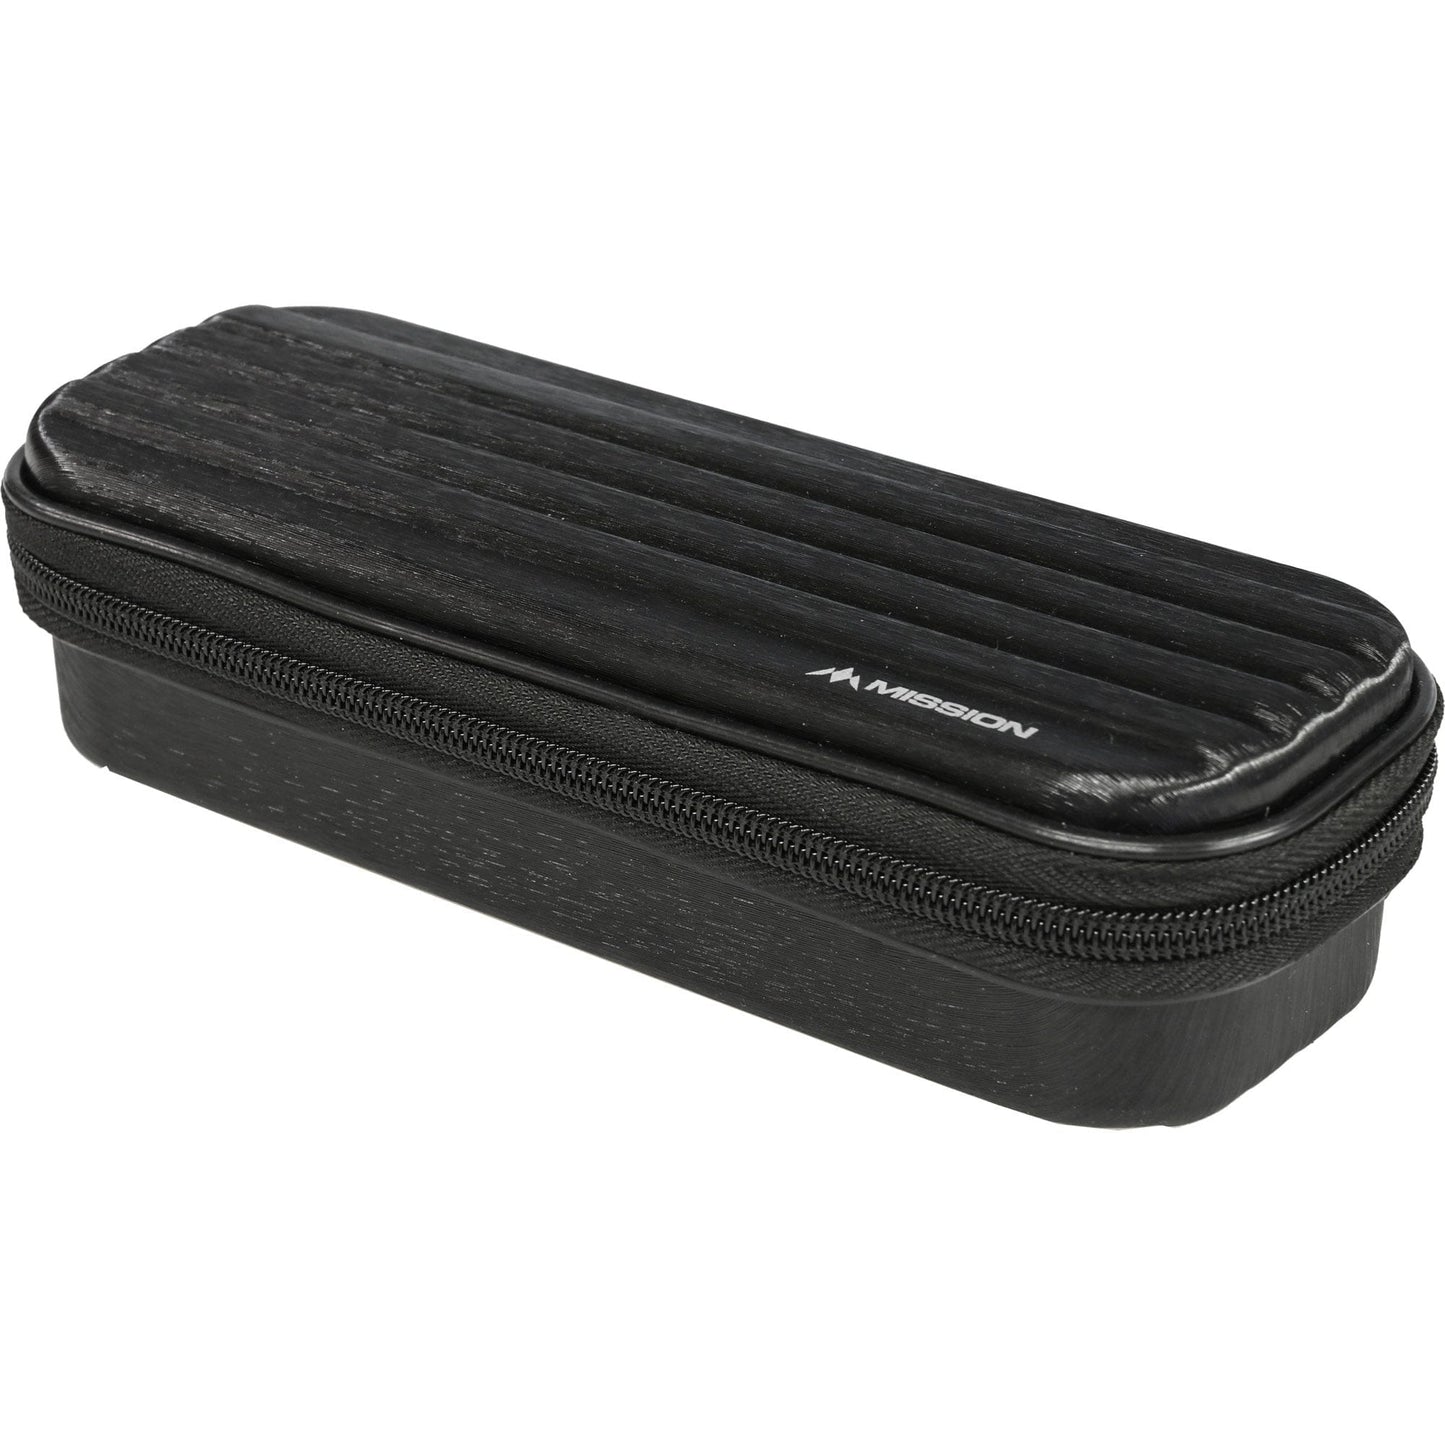 Mission ABS-1 Darts Case - Strong Protection - Metallic Black